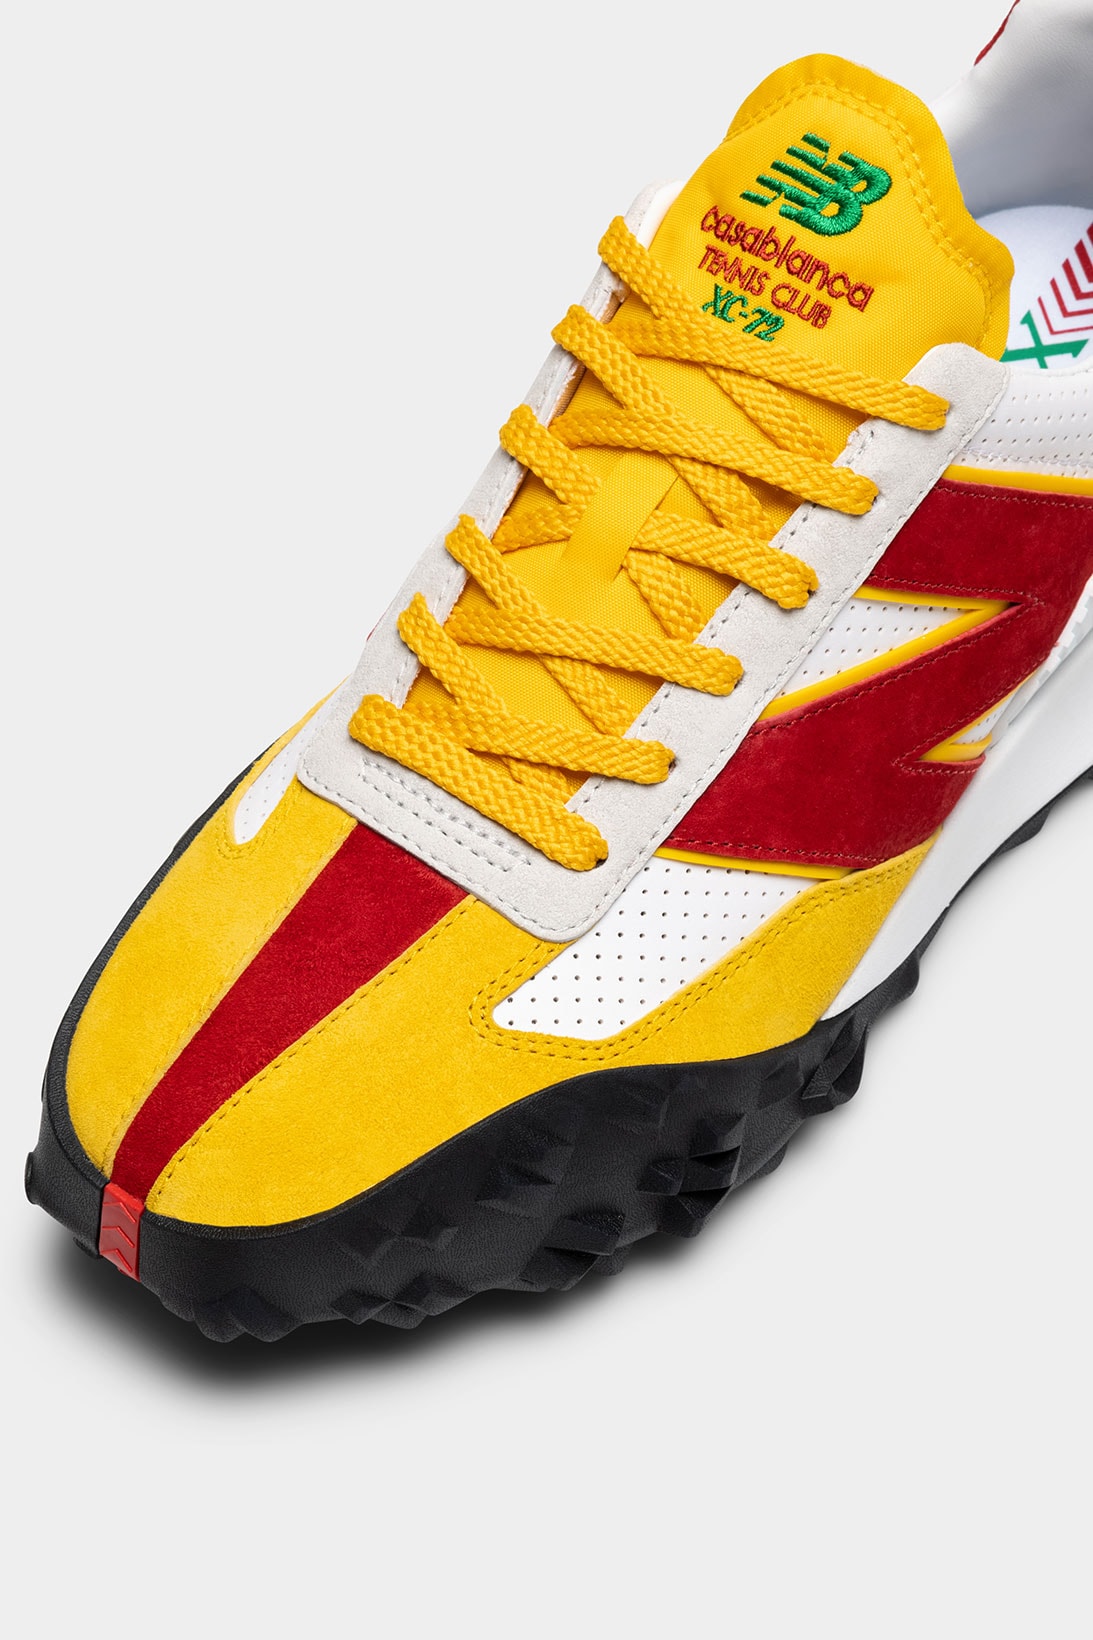 Casablanca New Balance NB XC-72 Sneakers Collaboration Yellow Red